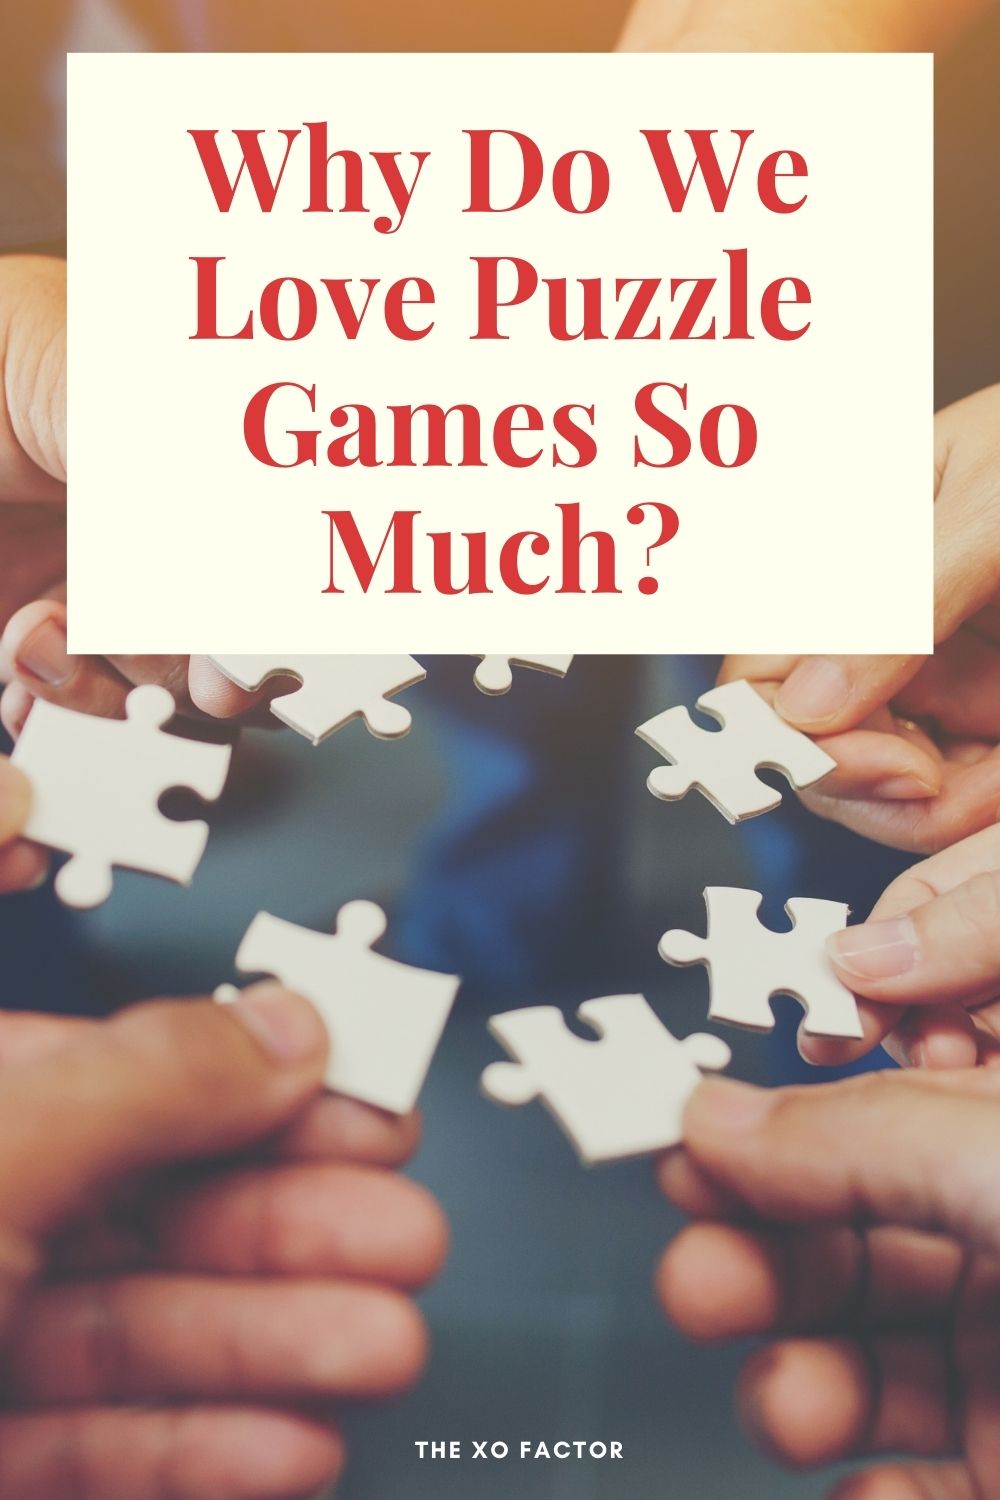 Puzzle Me This! Why Do We Love Puzzle Games So Much?